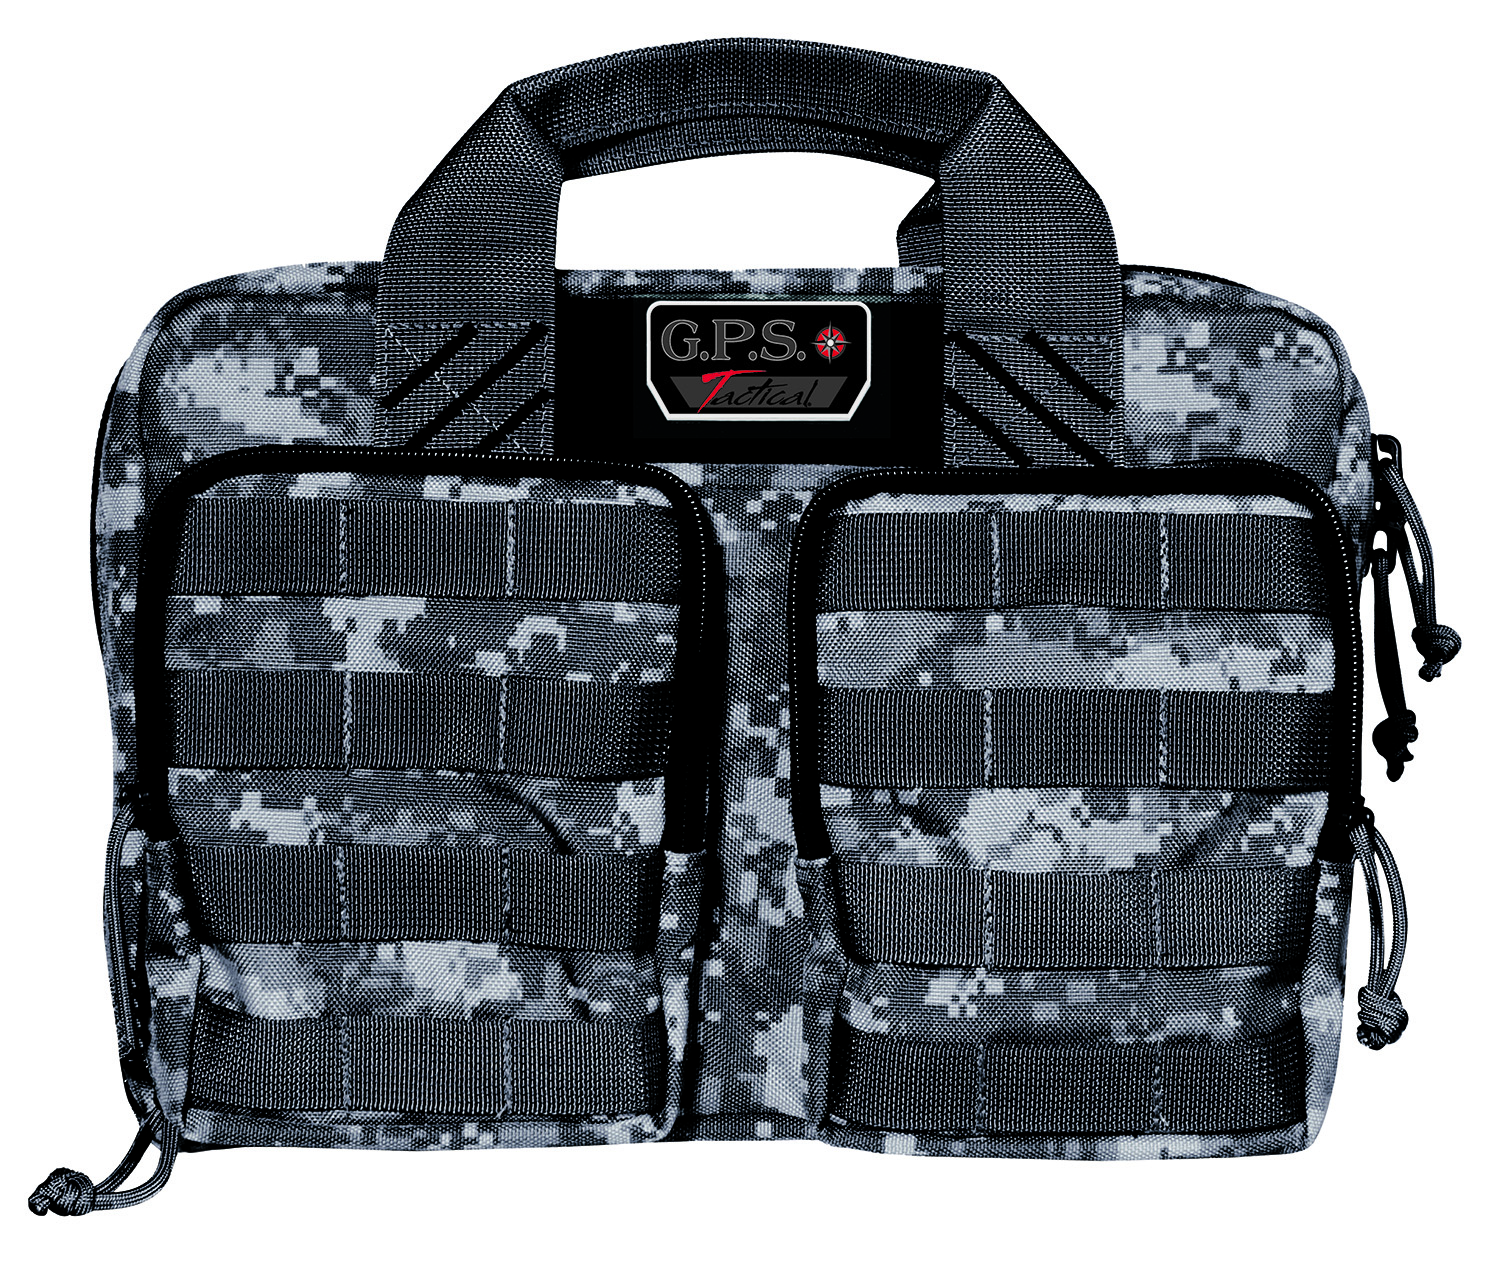 GPS Bags GPST1315PCG Tactical Quad +2 Gray Digital 1000D Polyester with YKK Lockable Zippers, 8 Mag Pockets, 2 Ammo Front Pockets, Visual ID Storage System & Holds Up To 6 Handguns